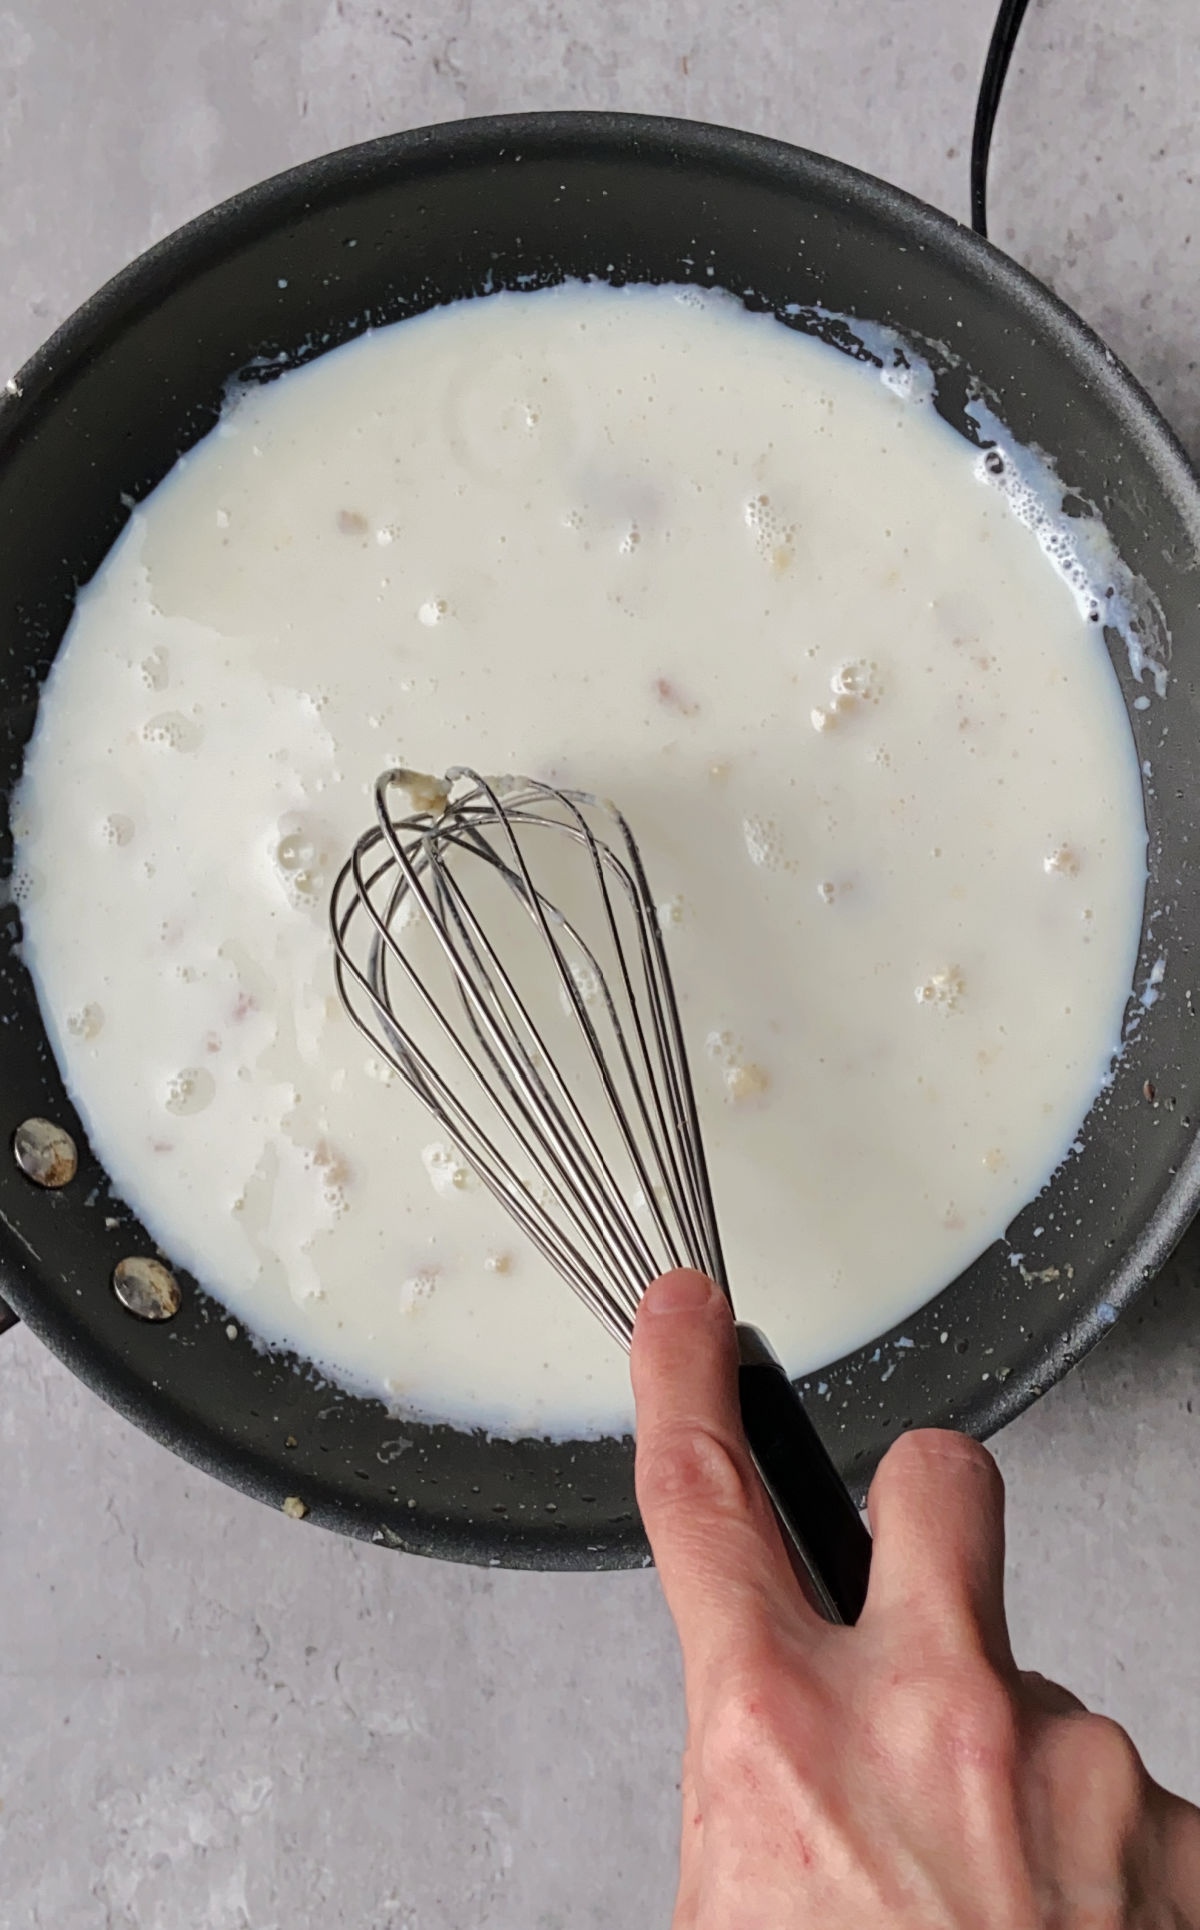 Whisking in the milk with the flour in a frying pan.